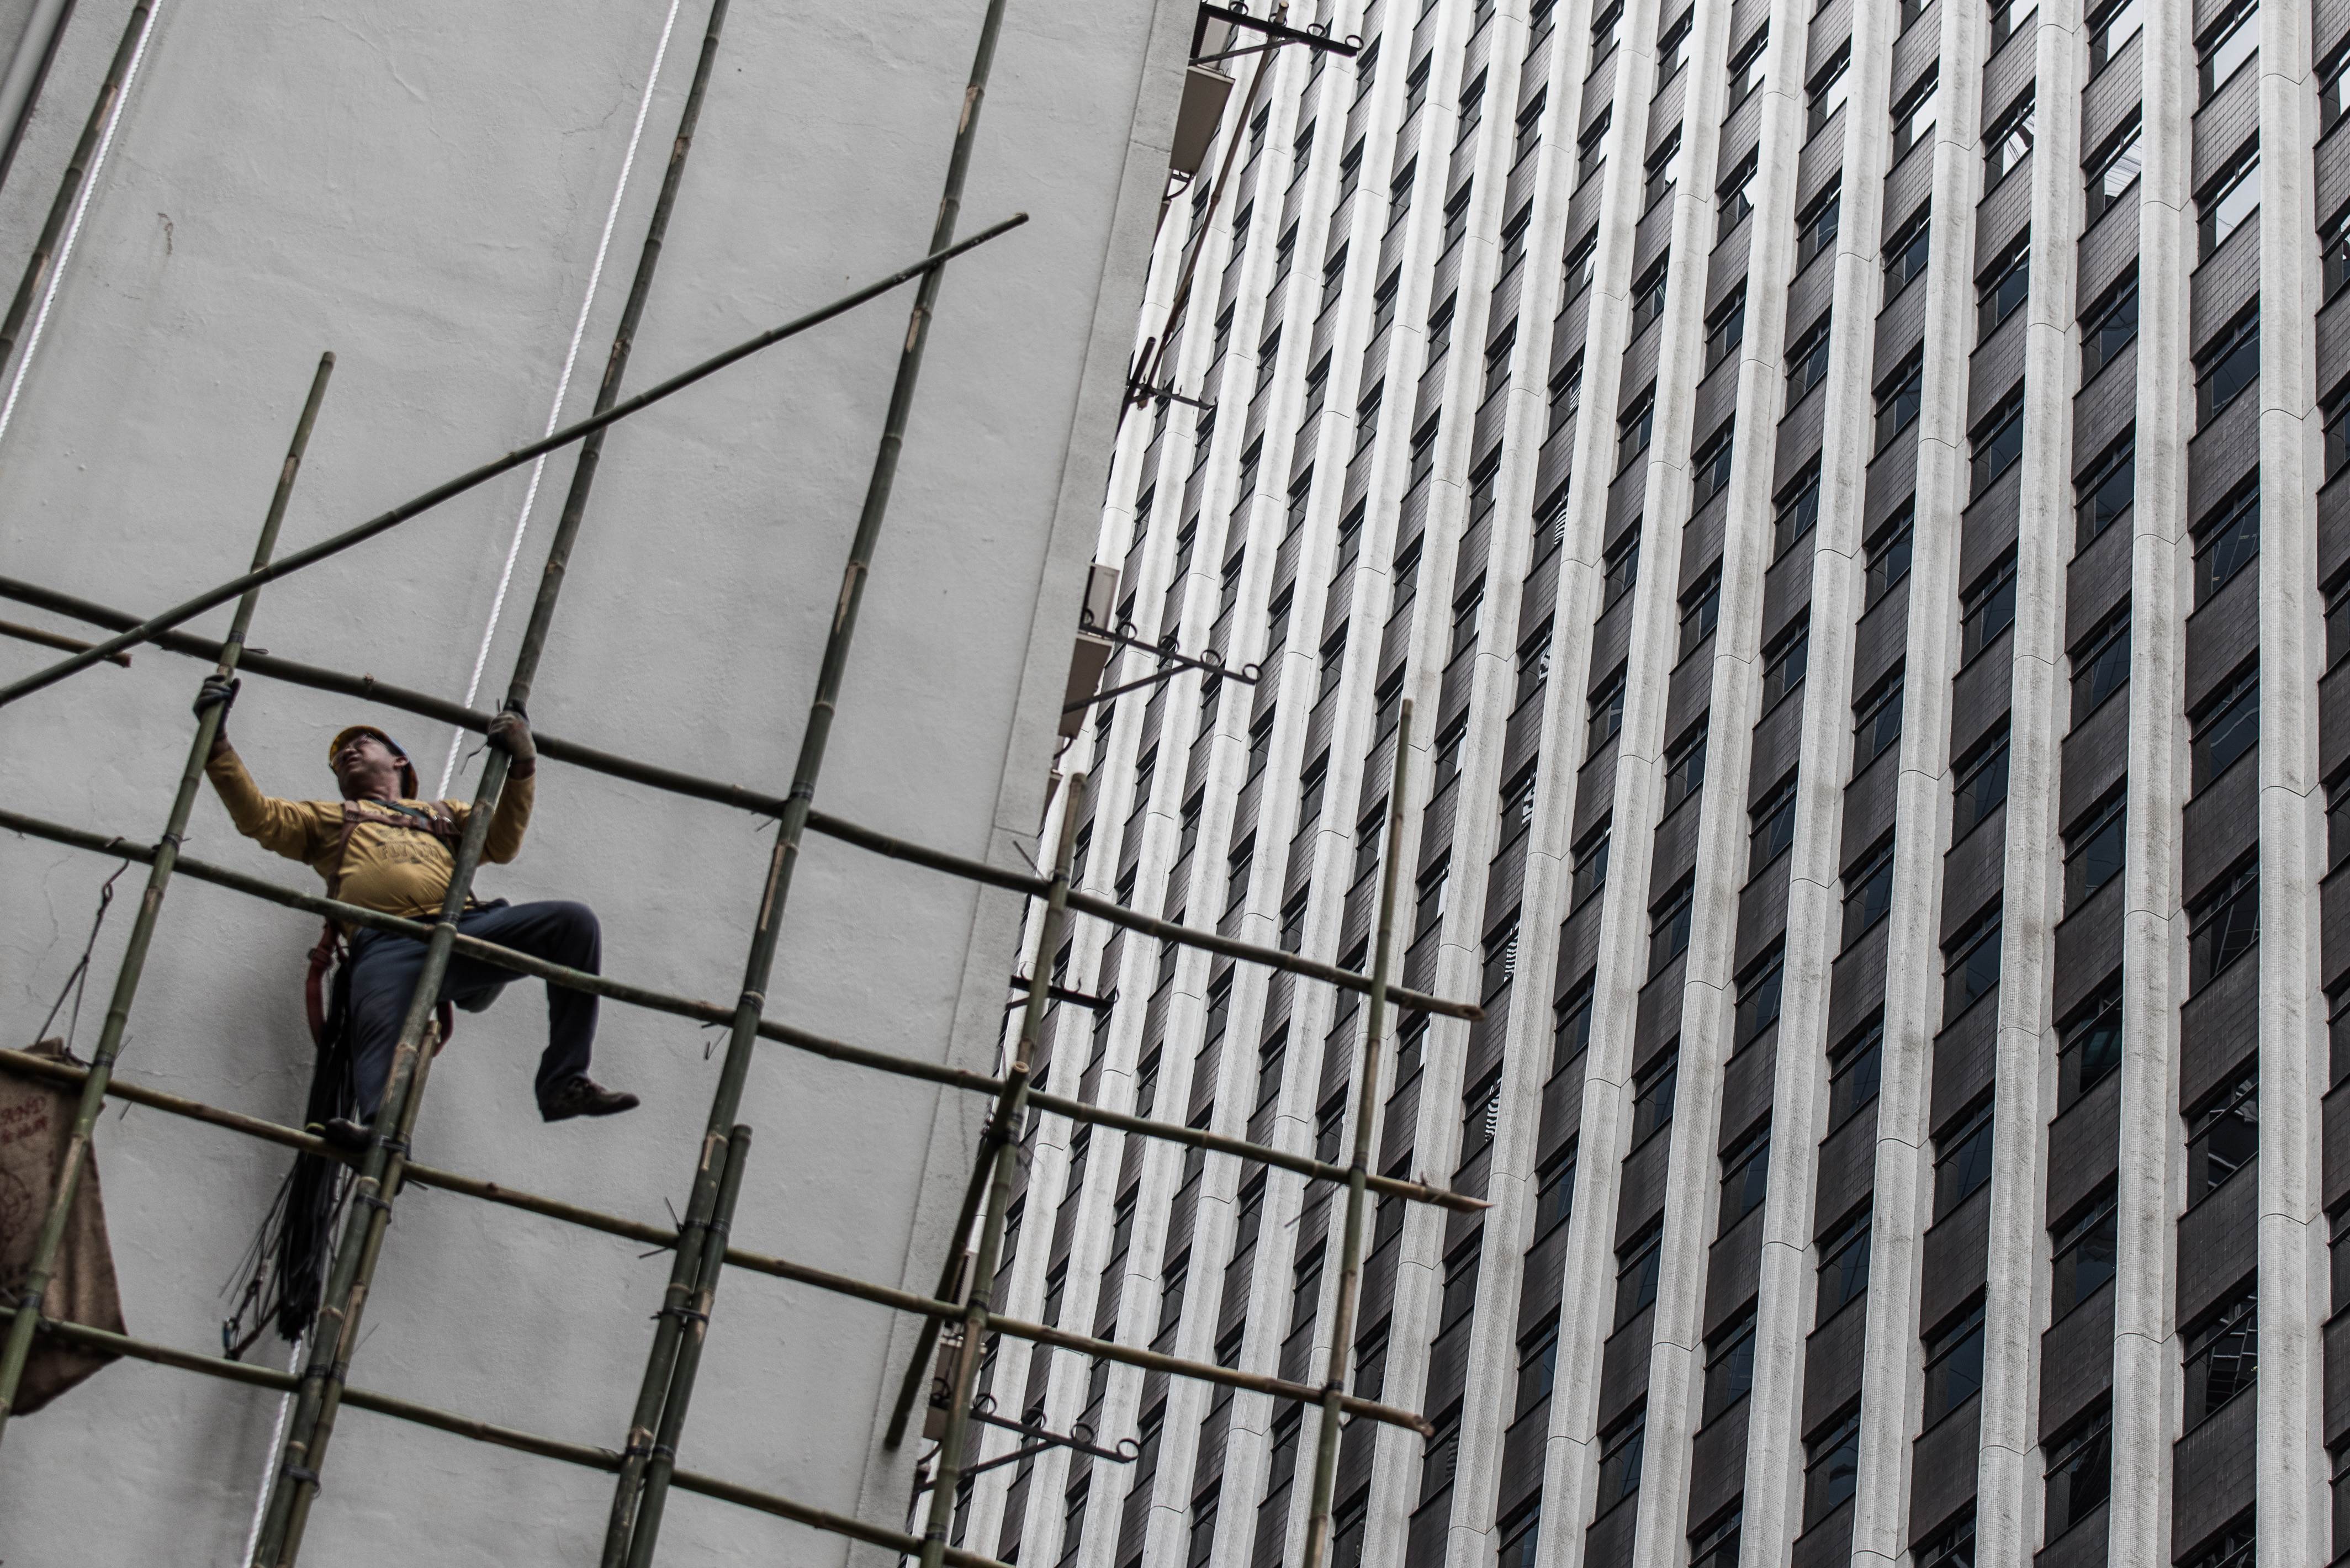 A worker balances on a bamboo scaffolding in Hong Kong on December 3, 2015. Hong Kong's bamboo scaffolders have risen above predictions that their trade would disappear, remaining a common sight high above the streets of the city, scaling the sides of towering, ultra-modern steel and glass buildings on traditional bamboo poles linked through ancient design concepts. AFP PHOTO / Philippe Lopez